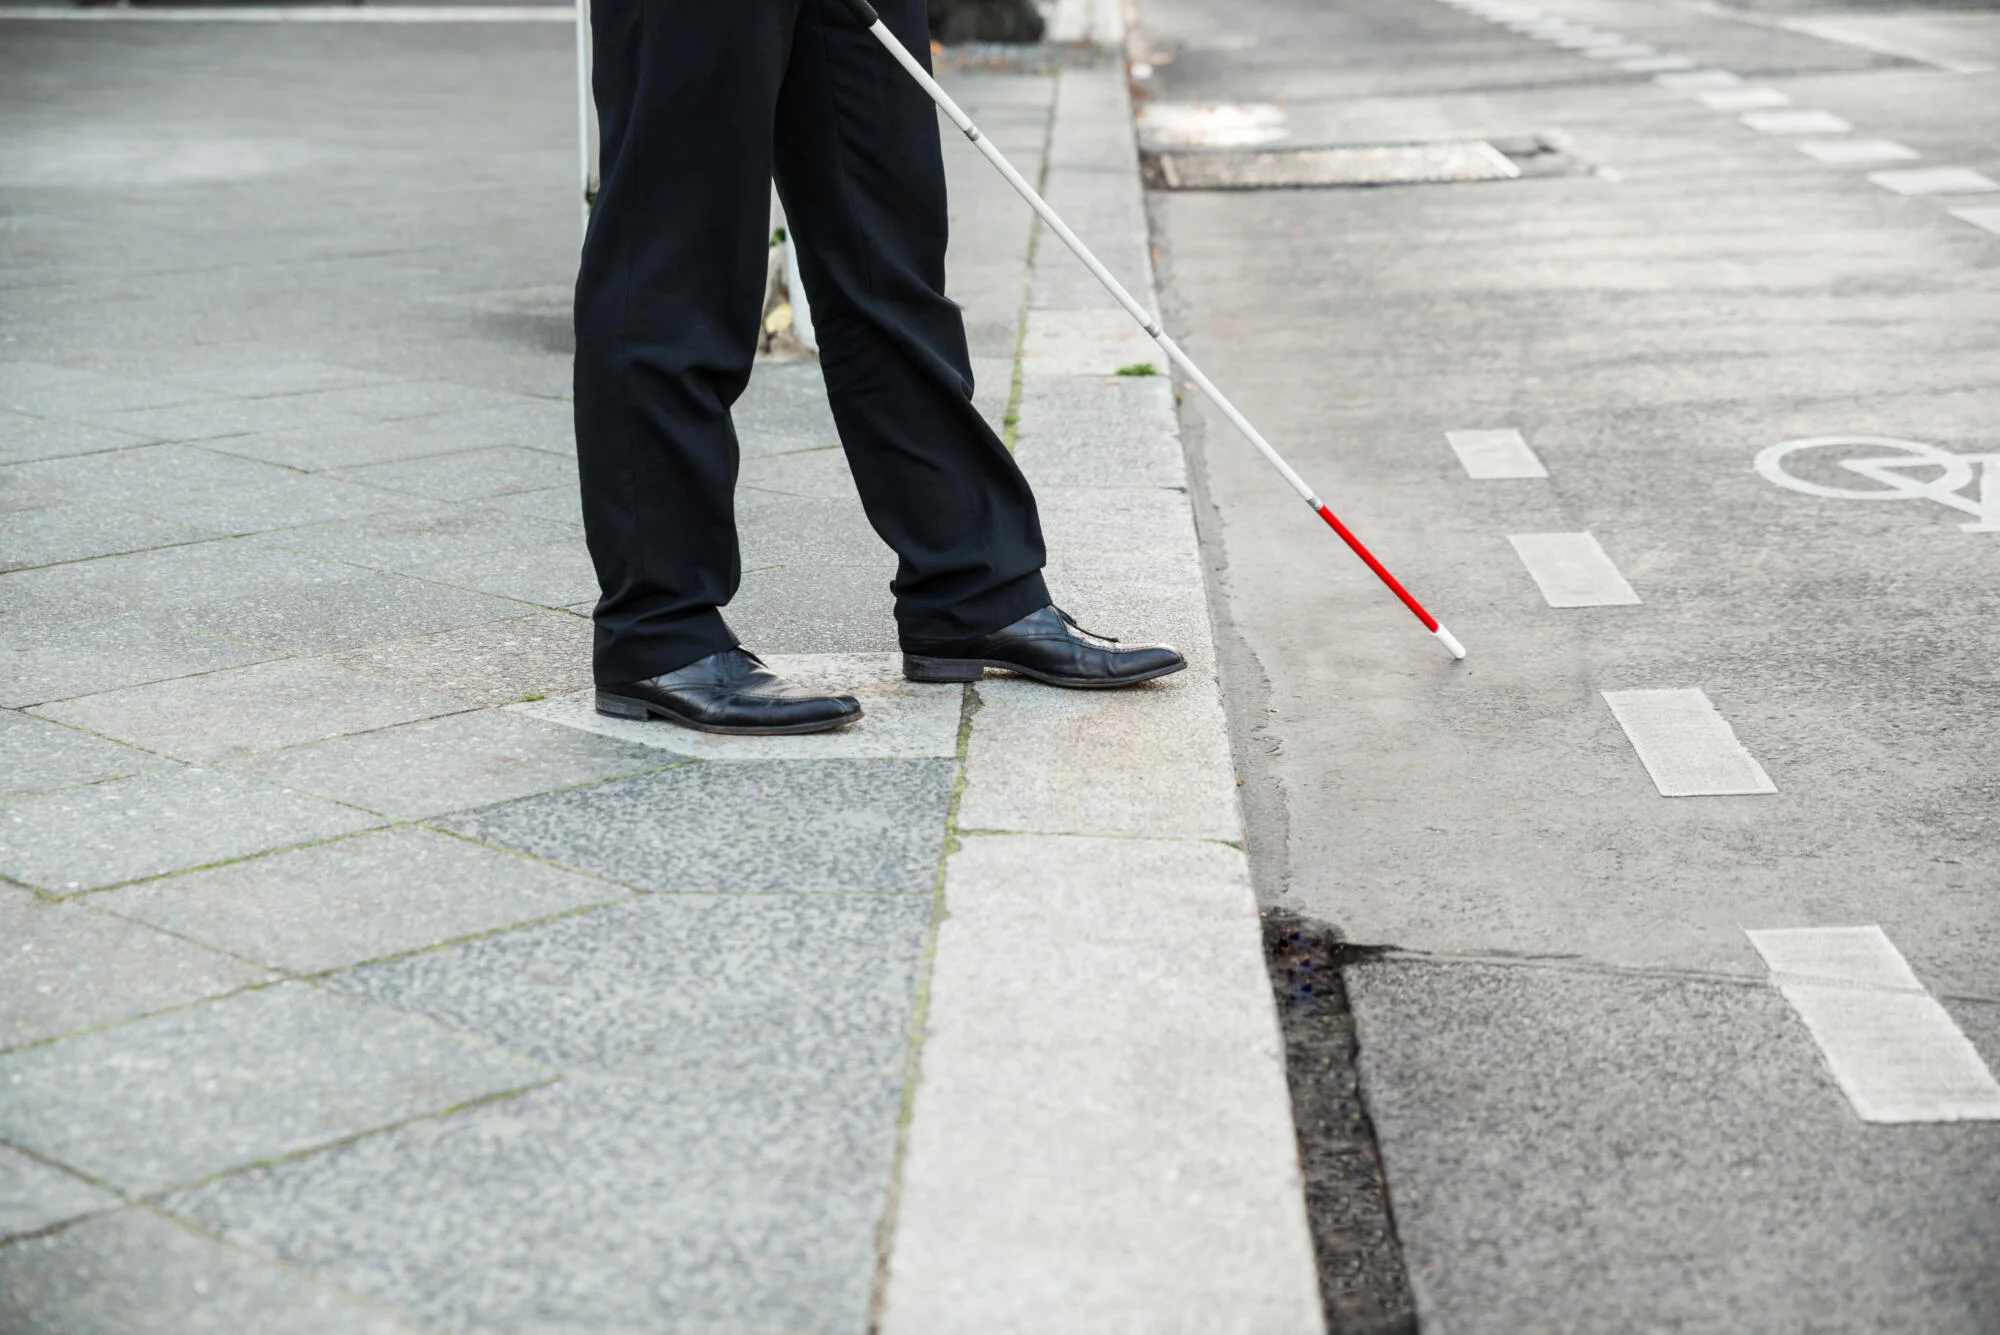 Île-de-France Mobilités and SNCF facilitate transport journeys for visually impaired